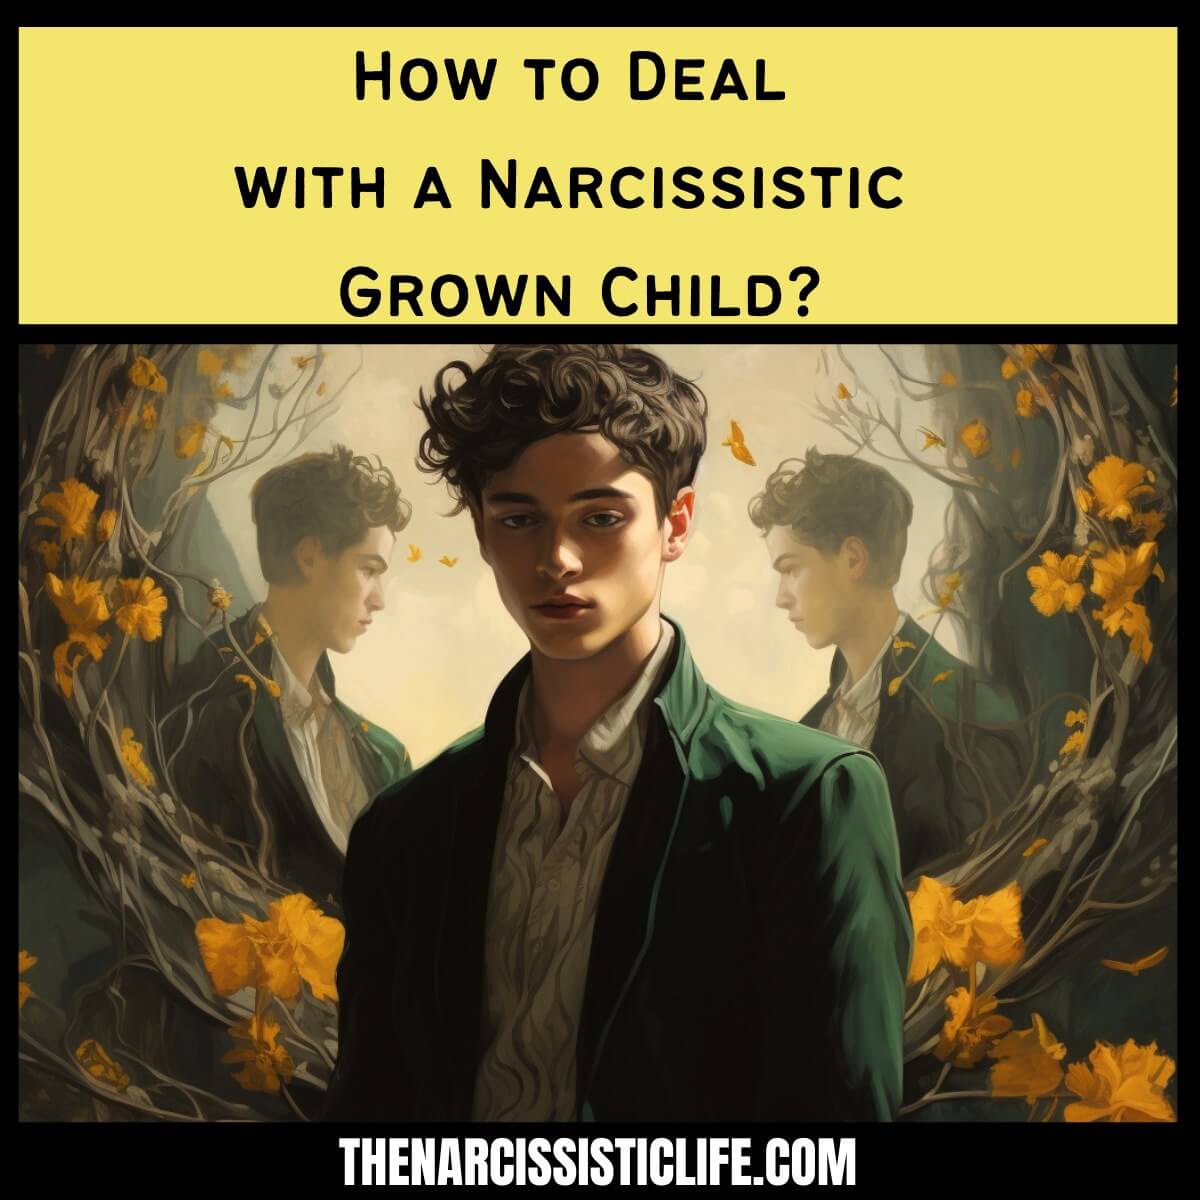 How to Deal with a Narcissistic Grown Child